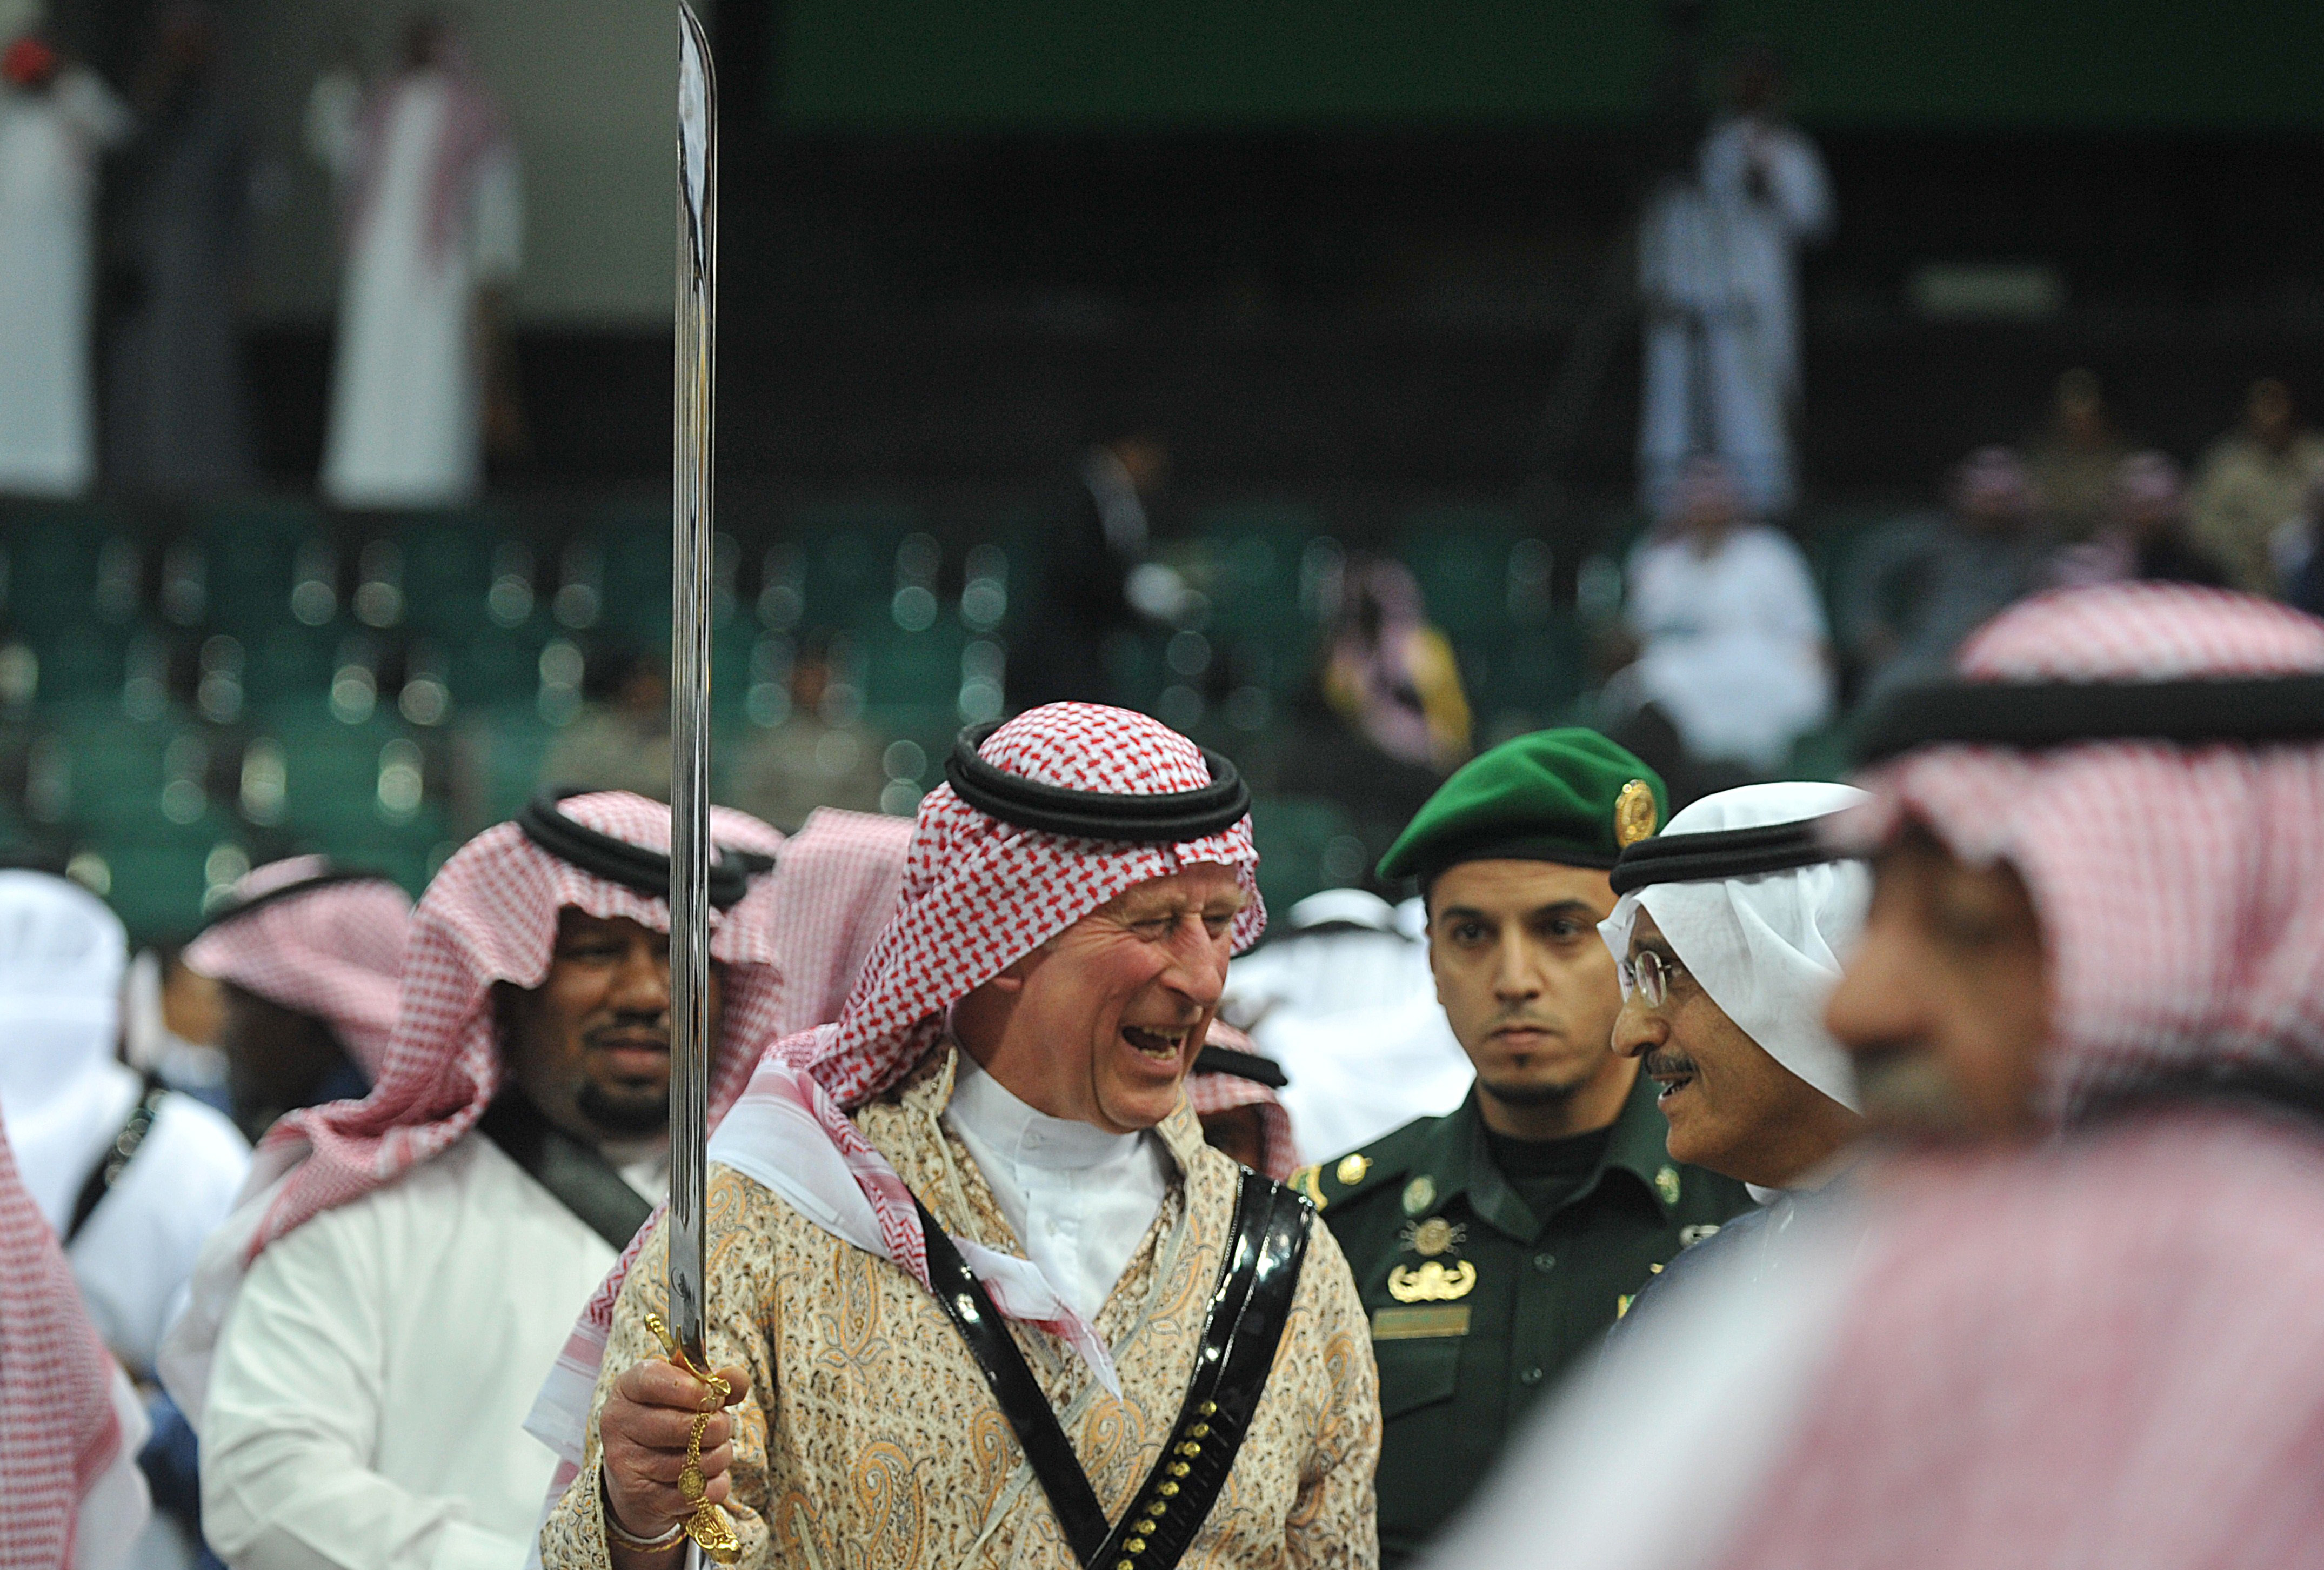 Britain&#039;s Prince Charles (C) wears traditional Saudi uniform as he dances with a sword during the traditional Saudi dancing best known as &#039;Arda&#039; performed during the Janadriya culture festiva